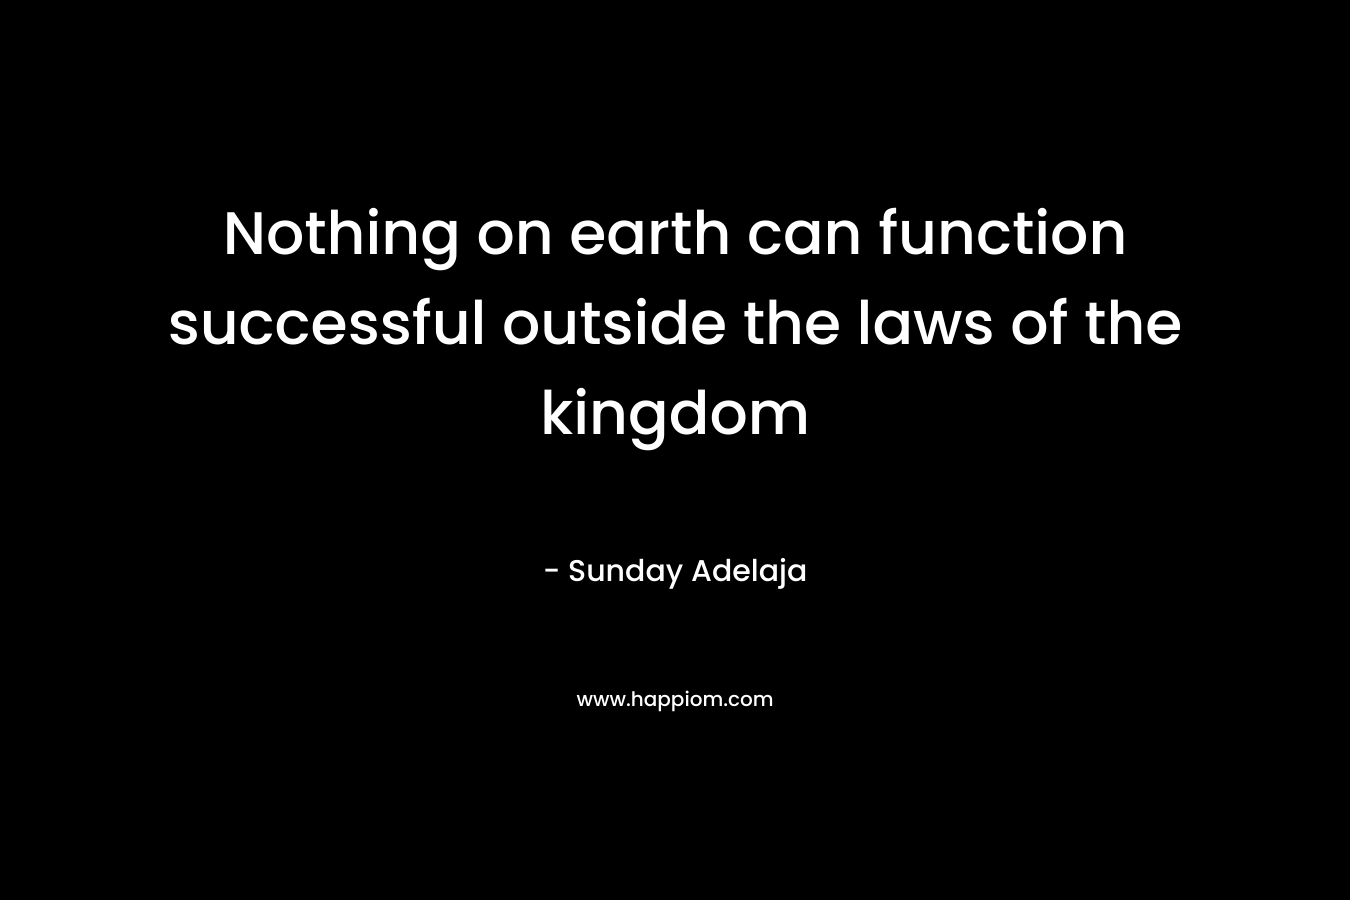 Nothing on earth can function successful outside the laws of the kingdom